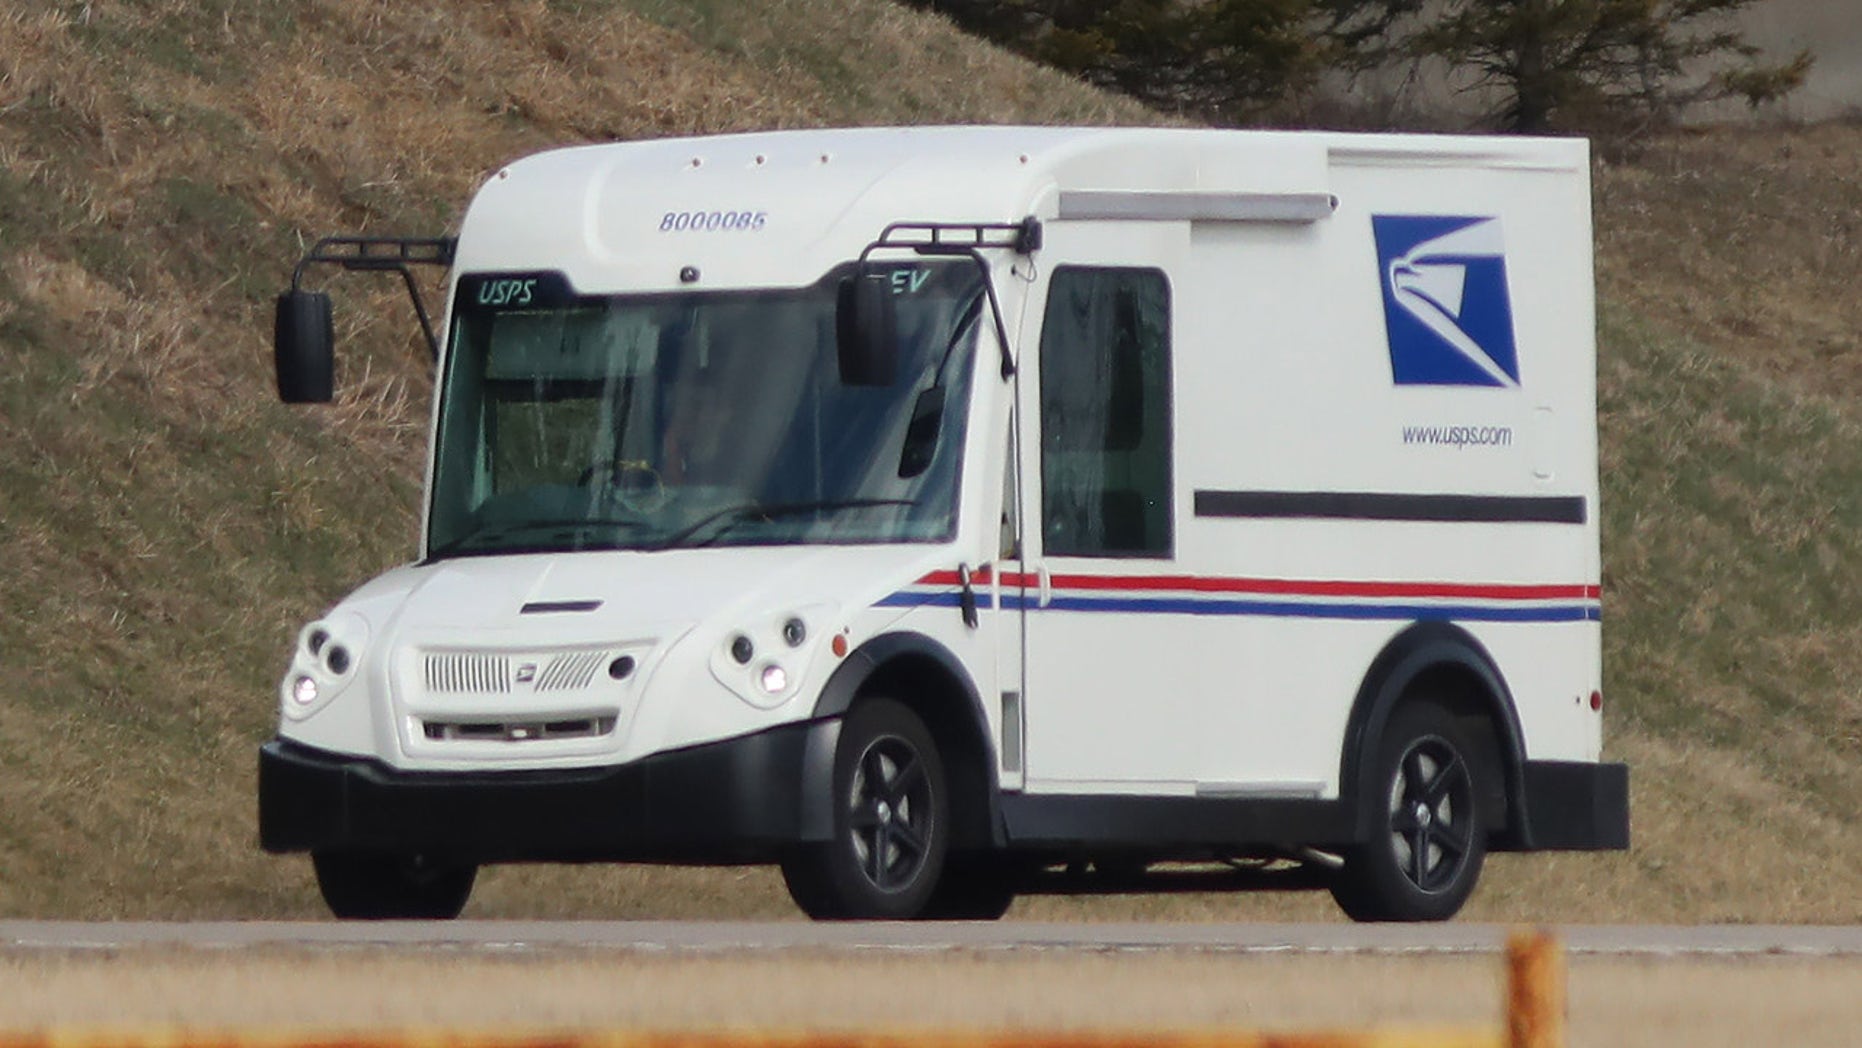 What will the new Post Office delivery vehicle look like?| Off-Topic Discussion forum